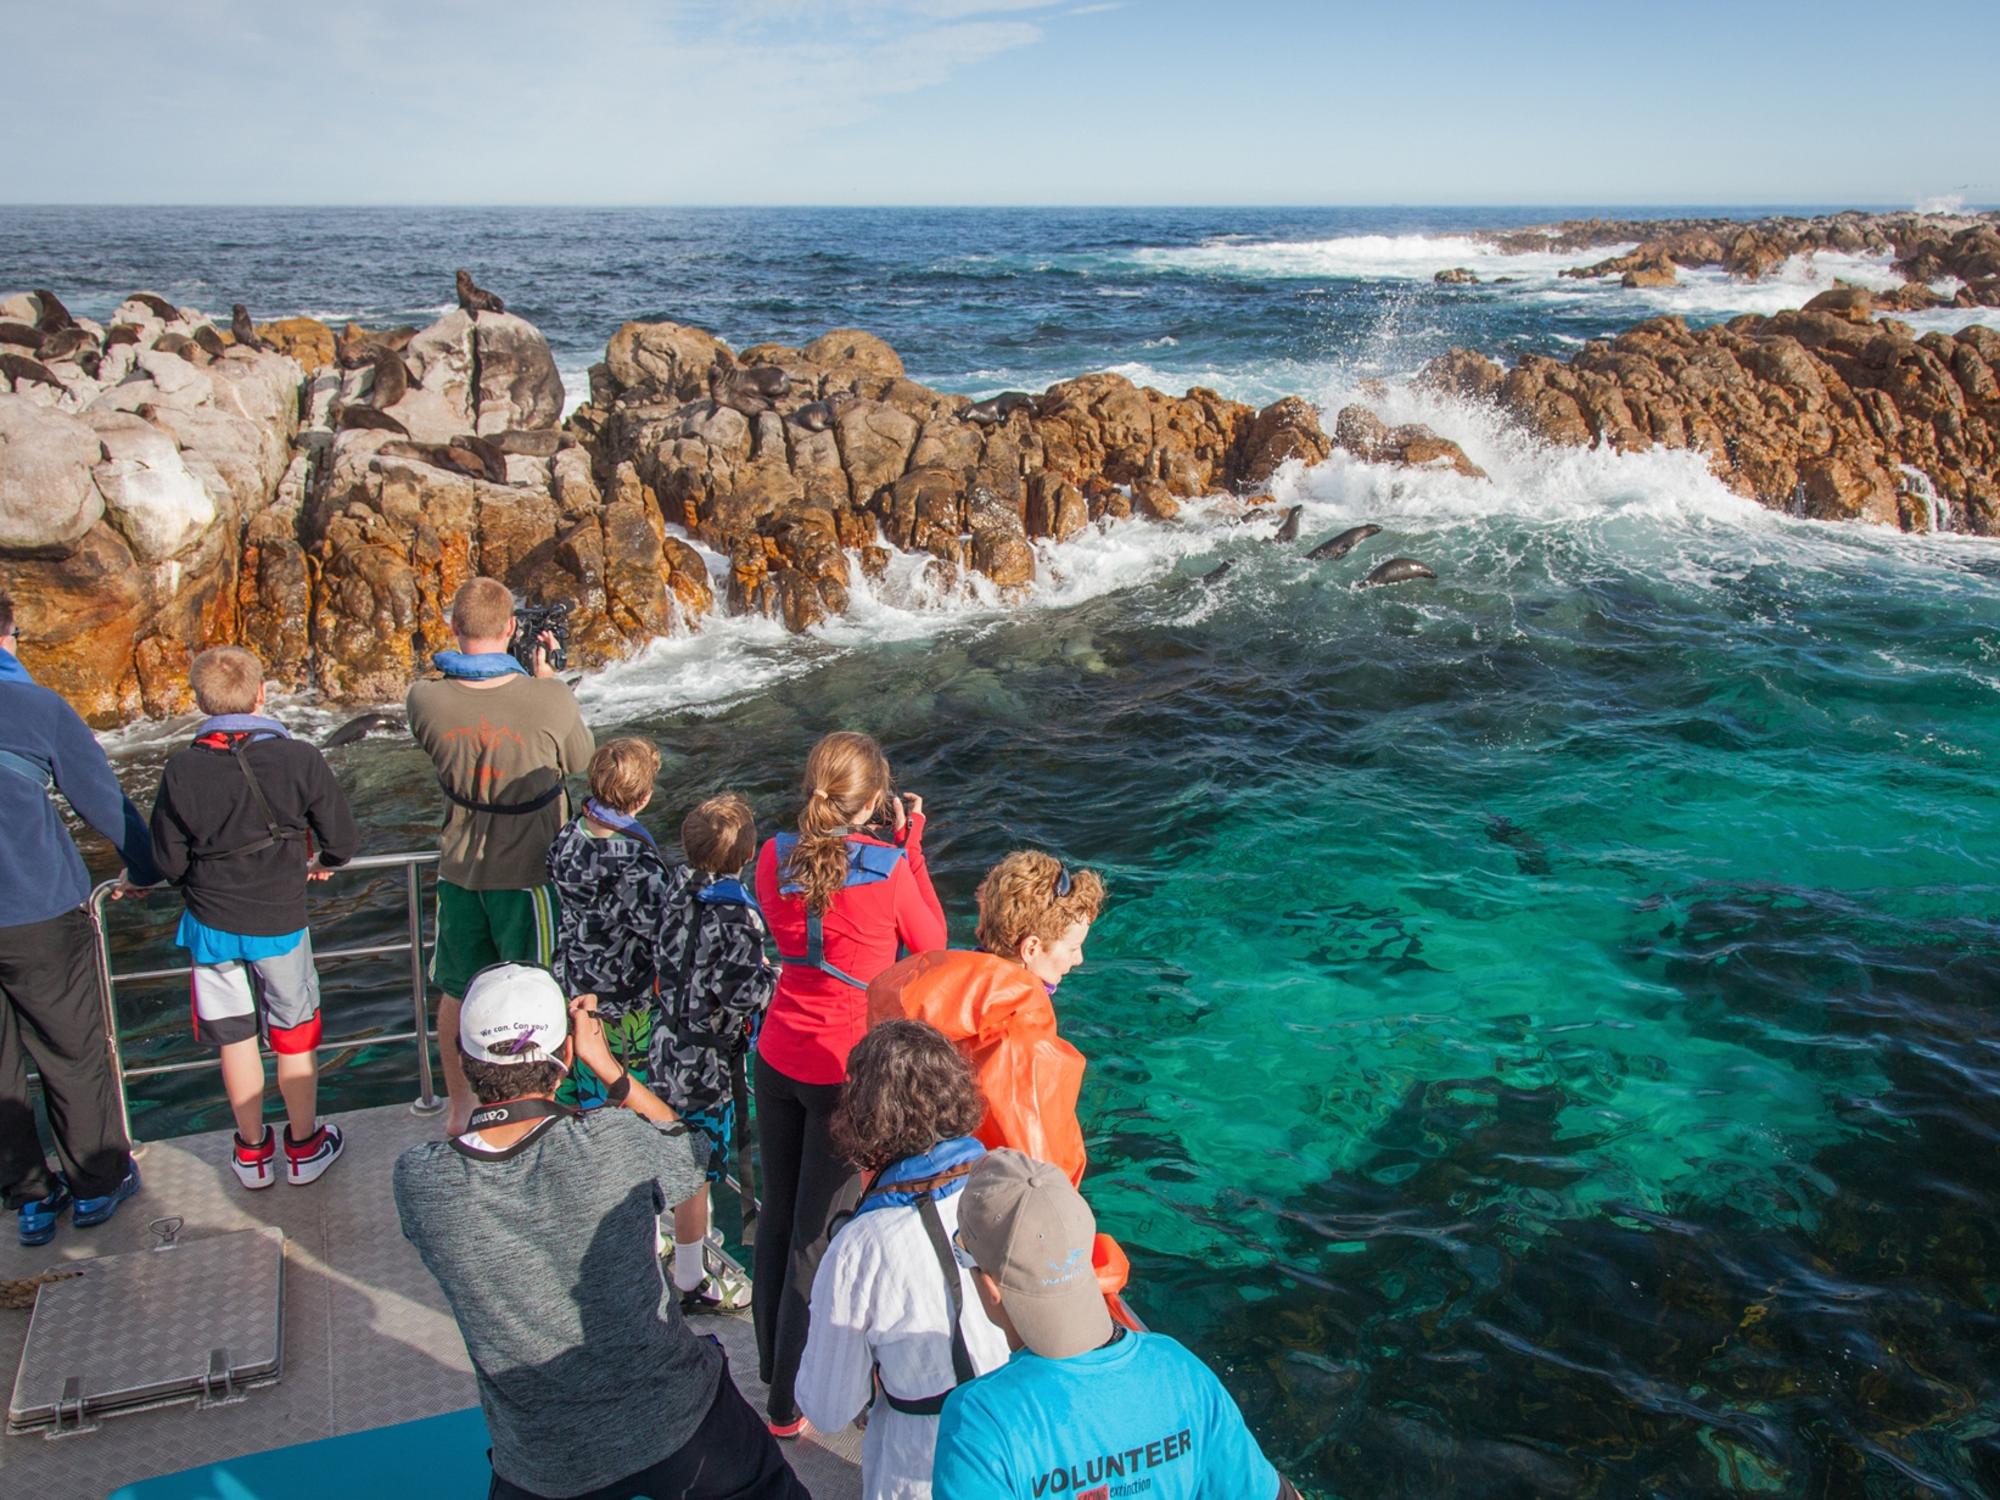 dyer island cruises cape town